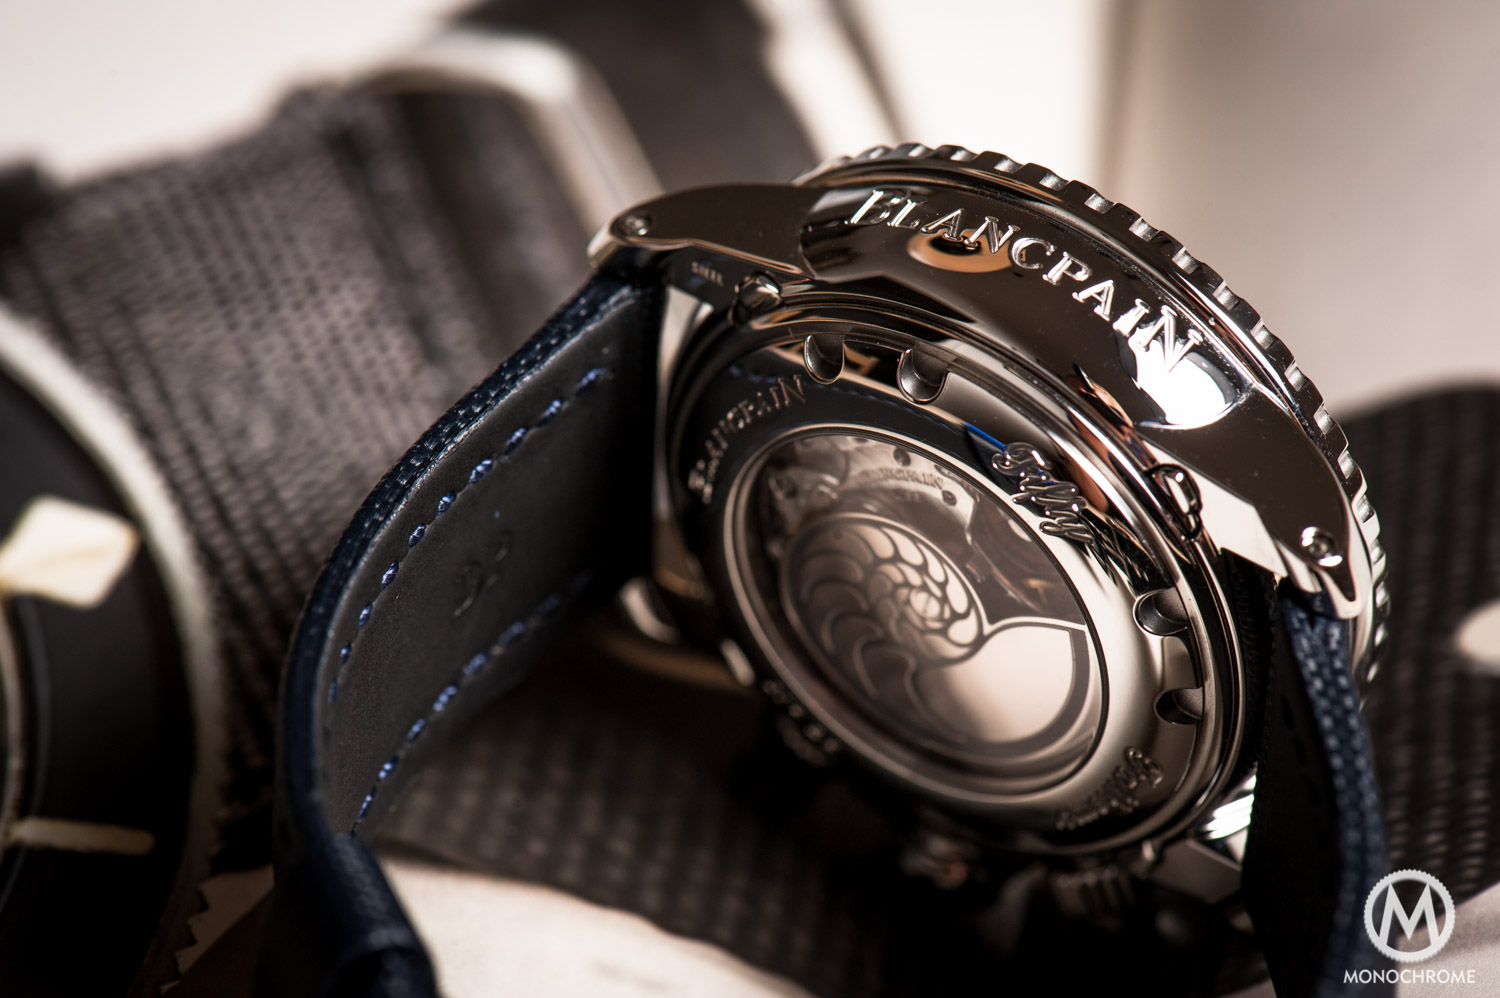 Blancpain Fifty Fathoms Chronographe Flyback Quantieme Complet